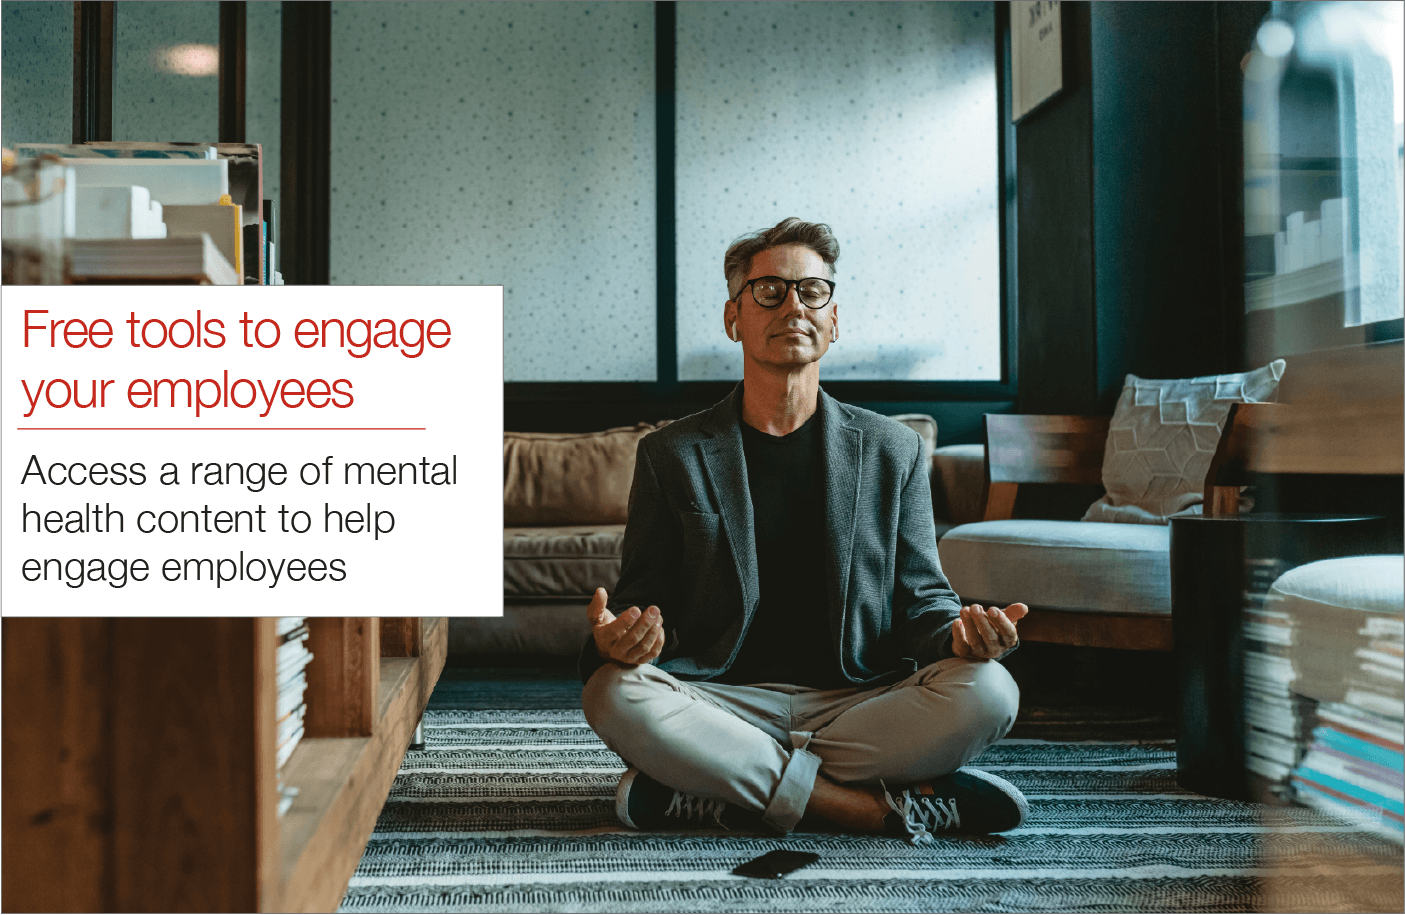 Tools to engage employees